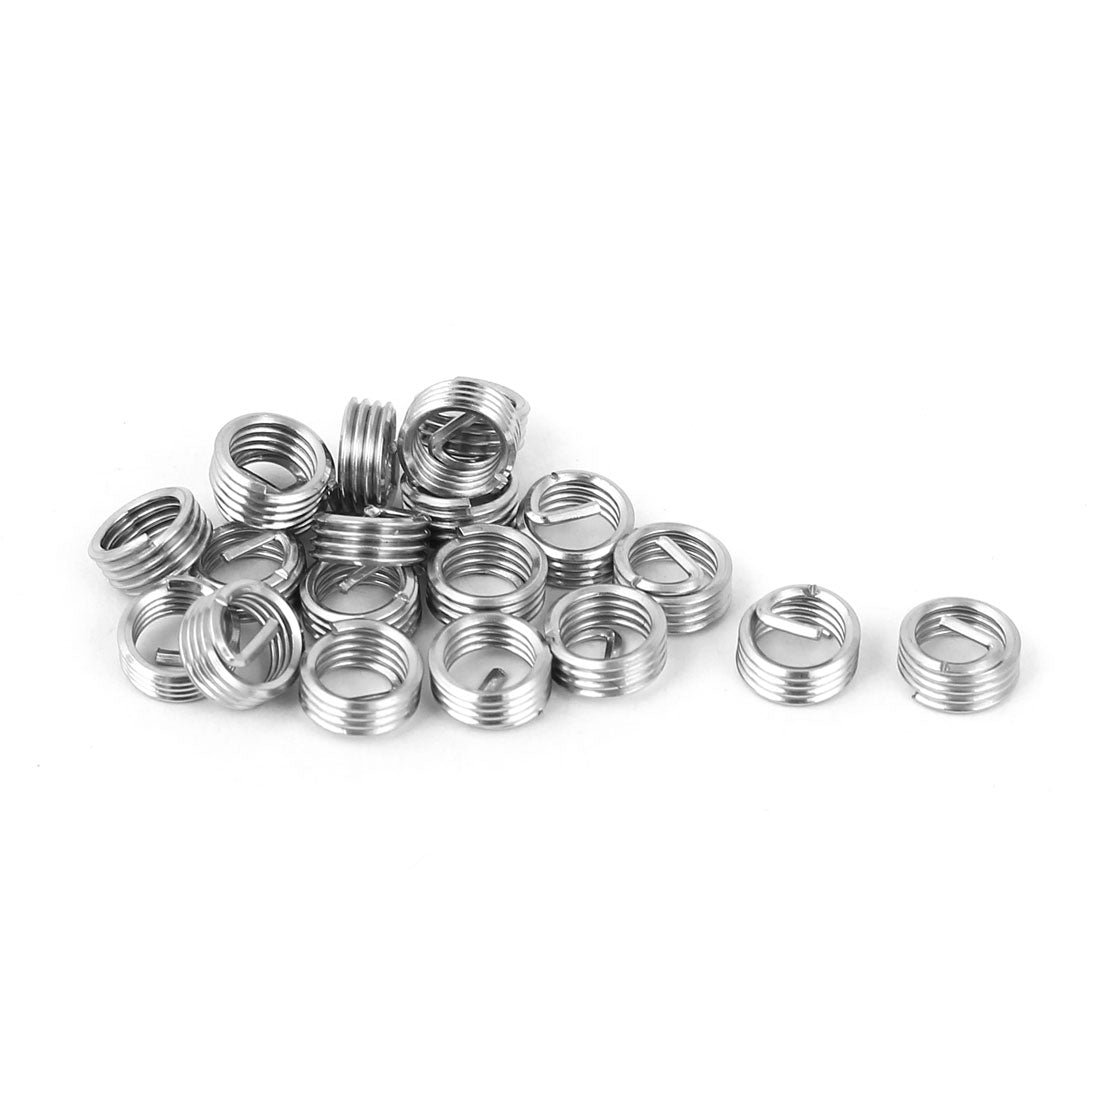 uxcell Uxcell M5 x 0.8mm x 1D 304 Stainless Steel helicoidal Wire Thread Insert 20pcs